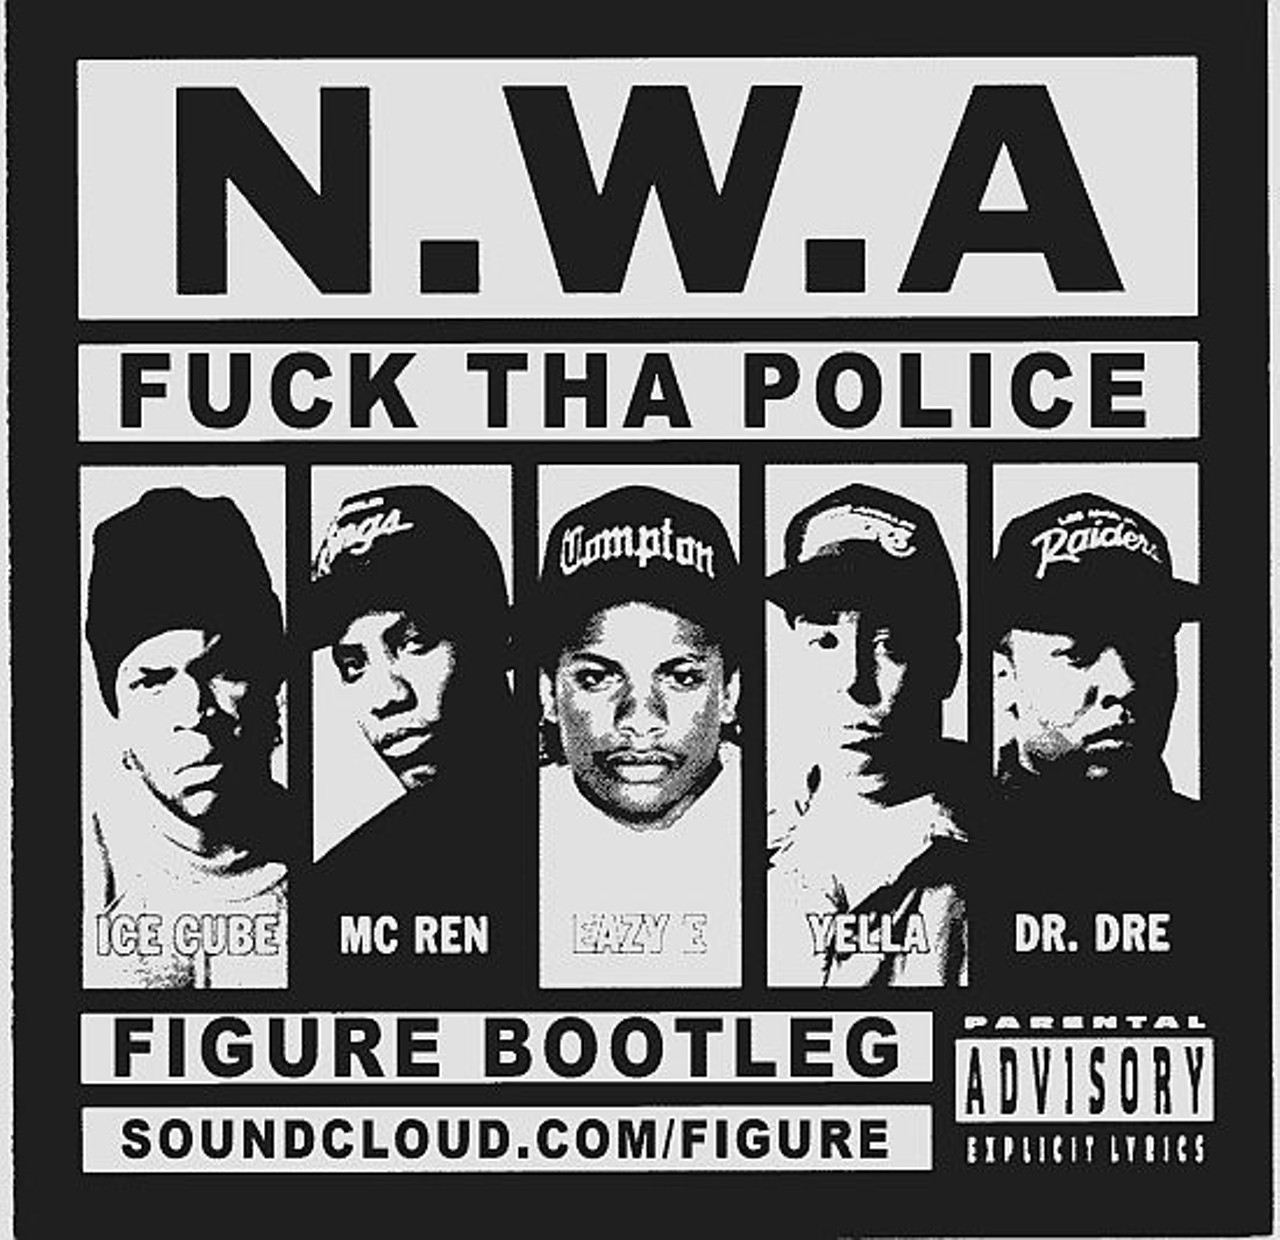 "Fuck tha Police" is a protest song off the group's "Straight Outta Compton" debut album. It ranks 425 on Rolling Stone's  500 Greatest Songs of All Time. It reached 25 on the U.S. Hot R&B/Hip-Hop Song chart in 2015 after the band's biography movie was released.